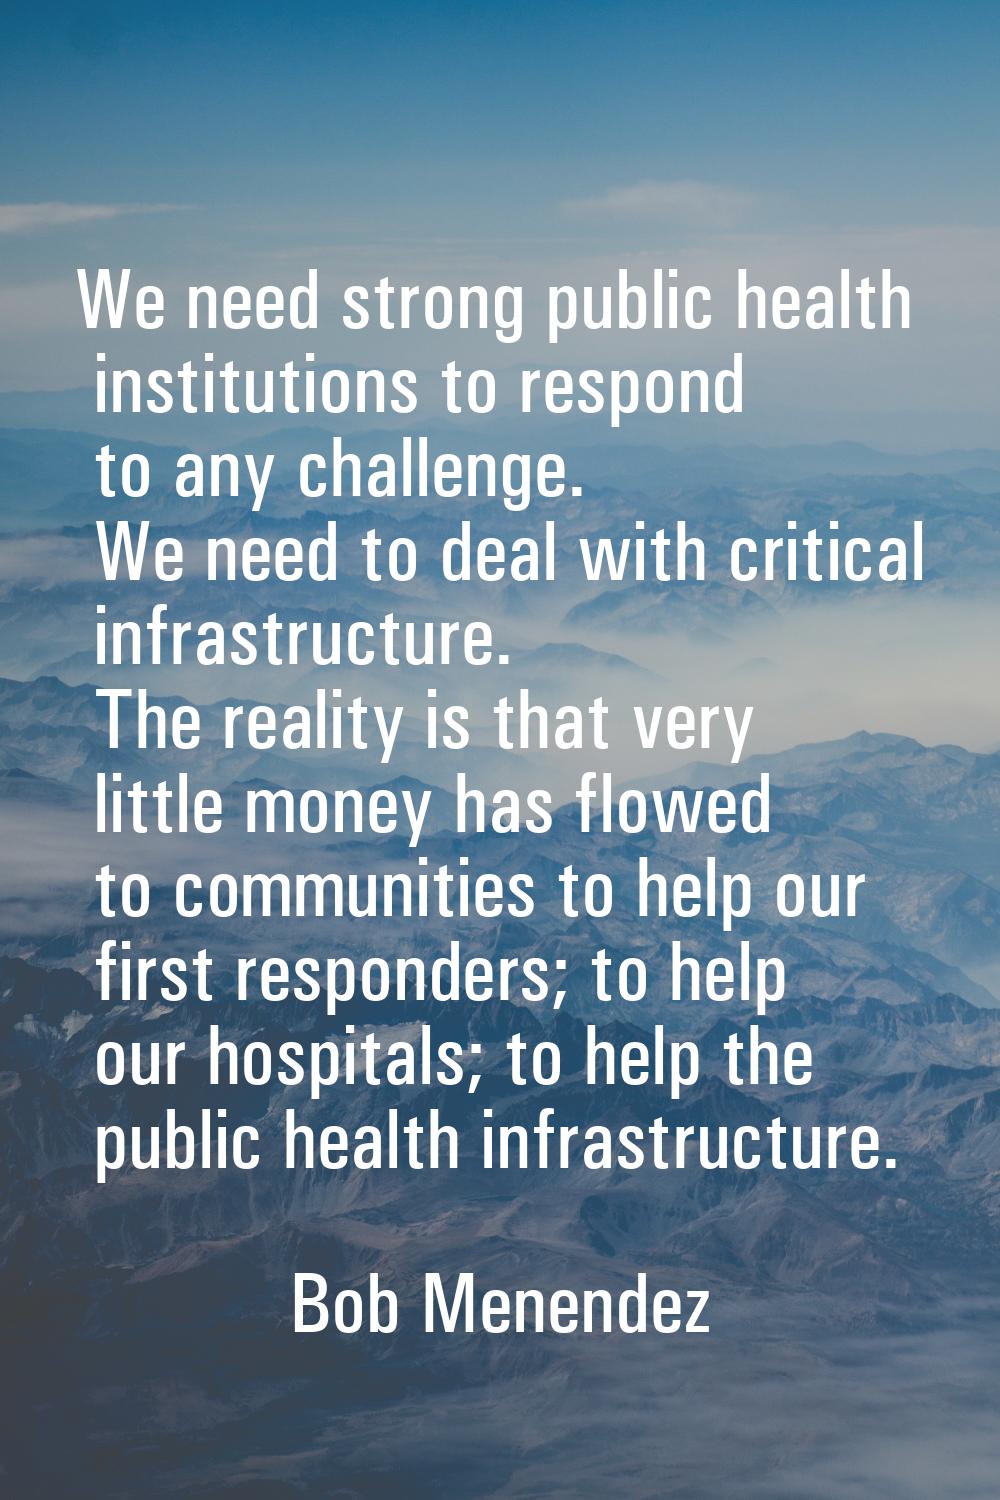 We need strong public health institutions to respond to any challenge. We need to deal with critica